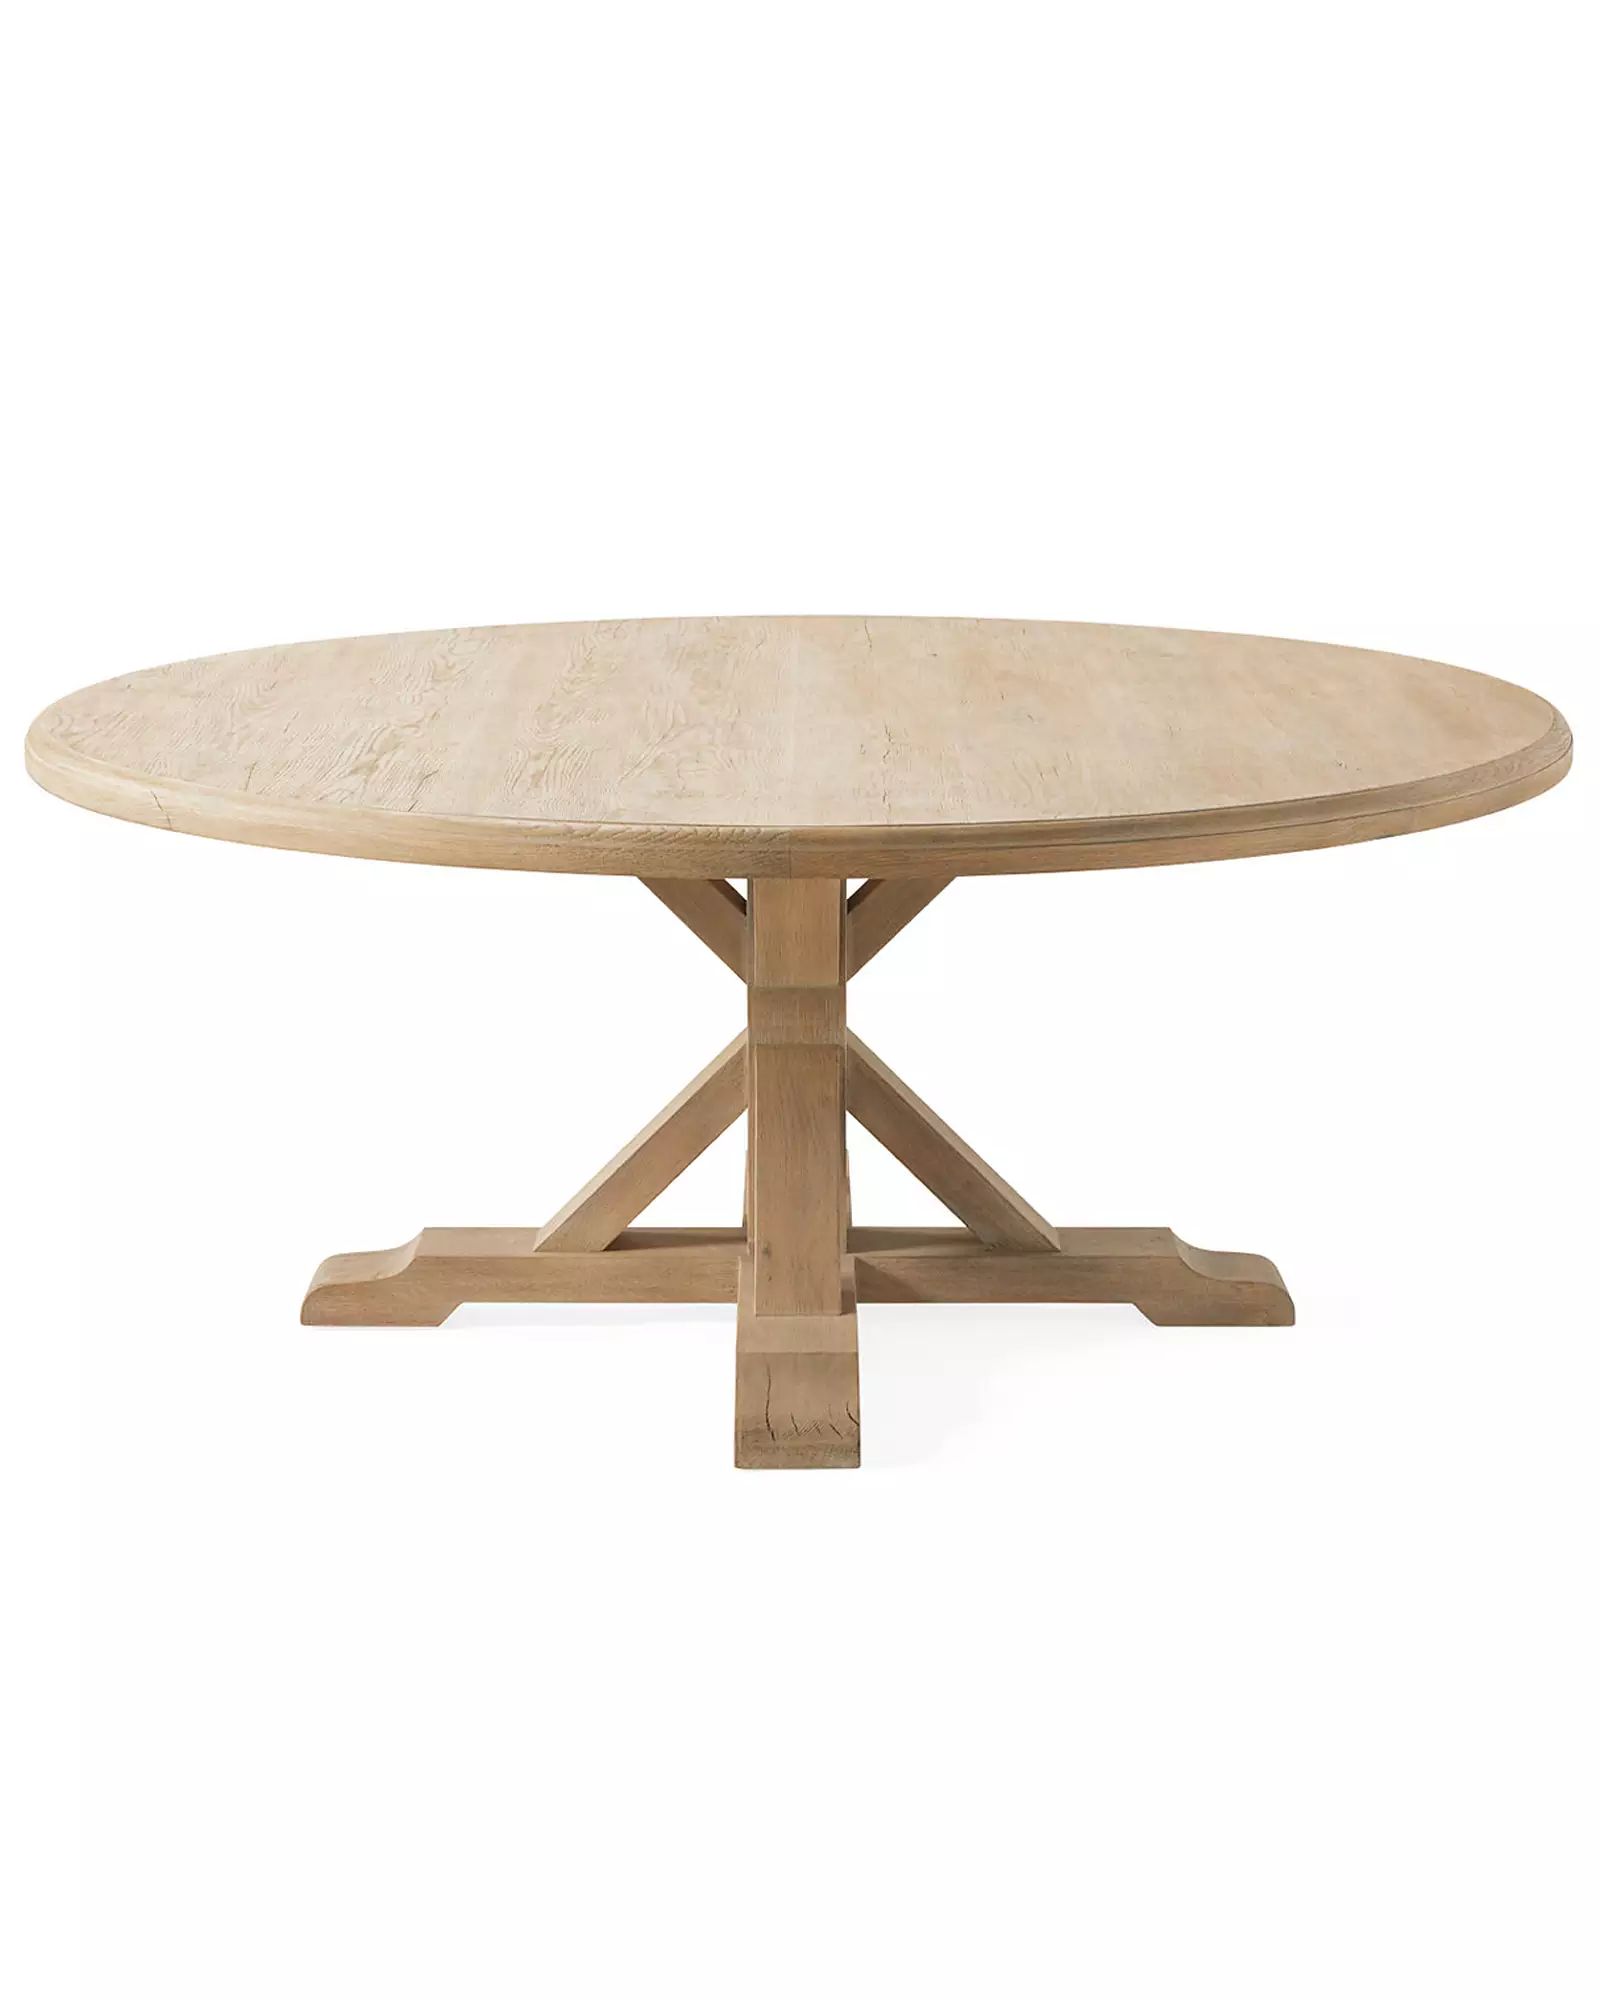 Lake House Round Dining Table | Serena and Lily